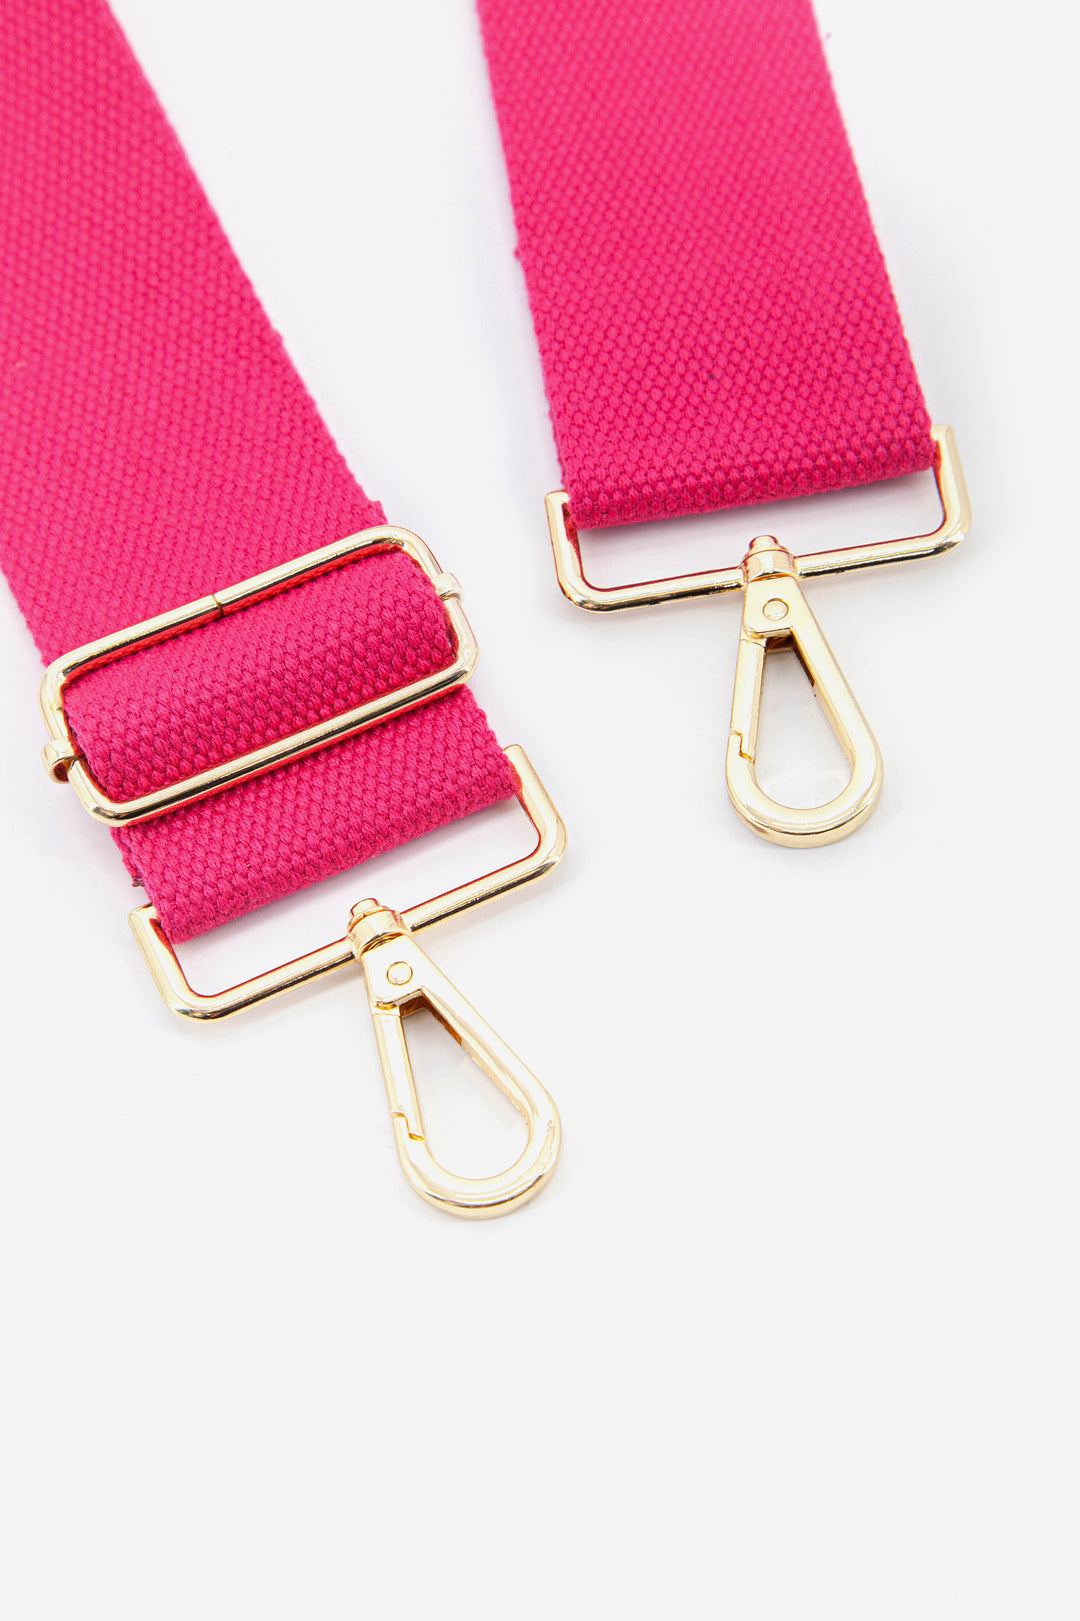 close up of the gold clip on snap hook attachments and vibrant pink colour